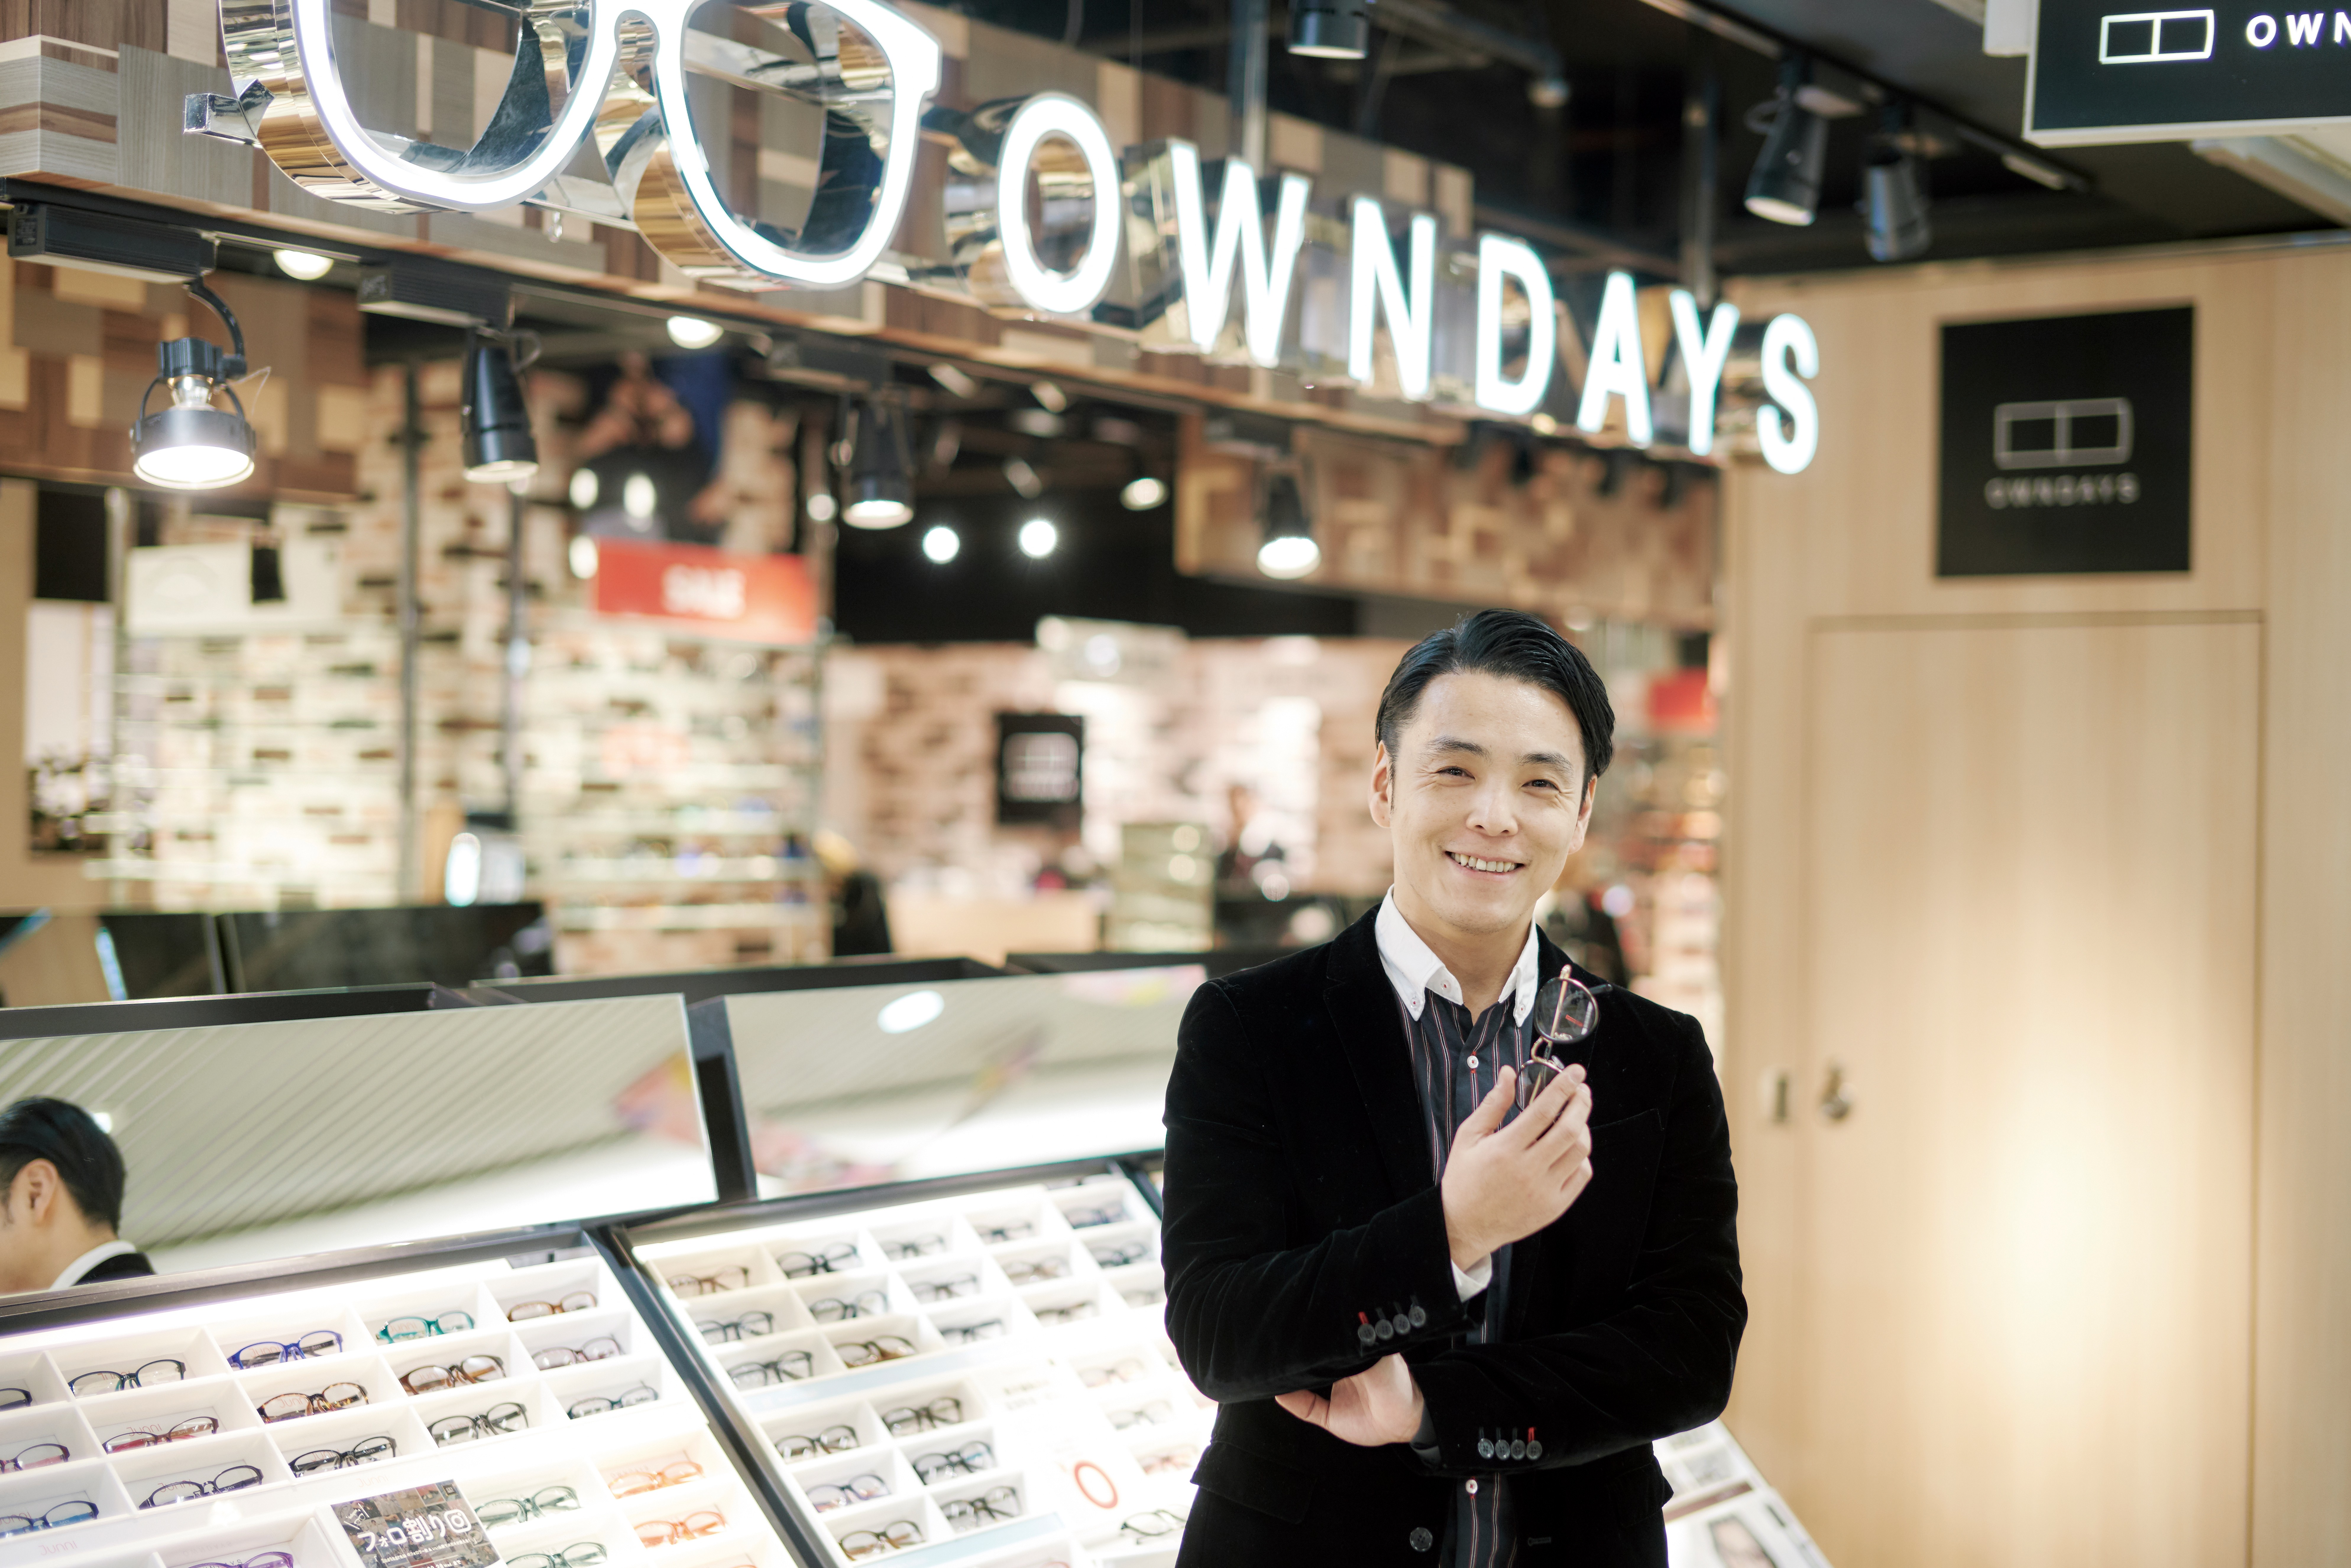 Owndays' eyewear inspires customers to be distinctly refreshed and